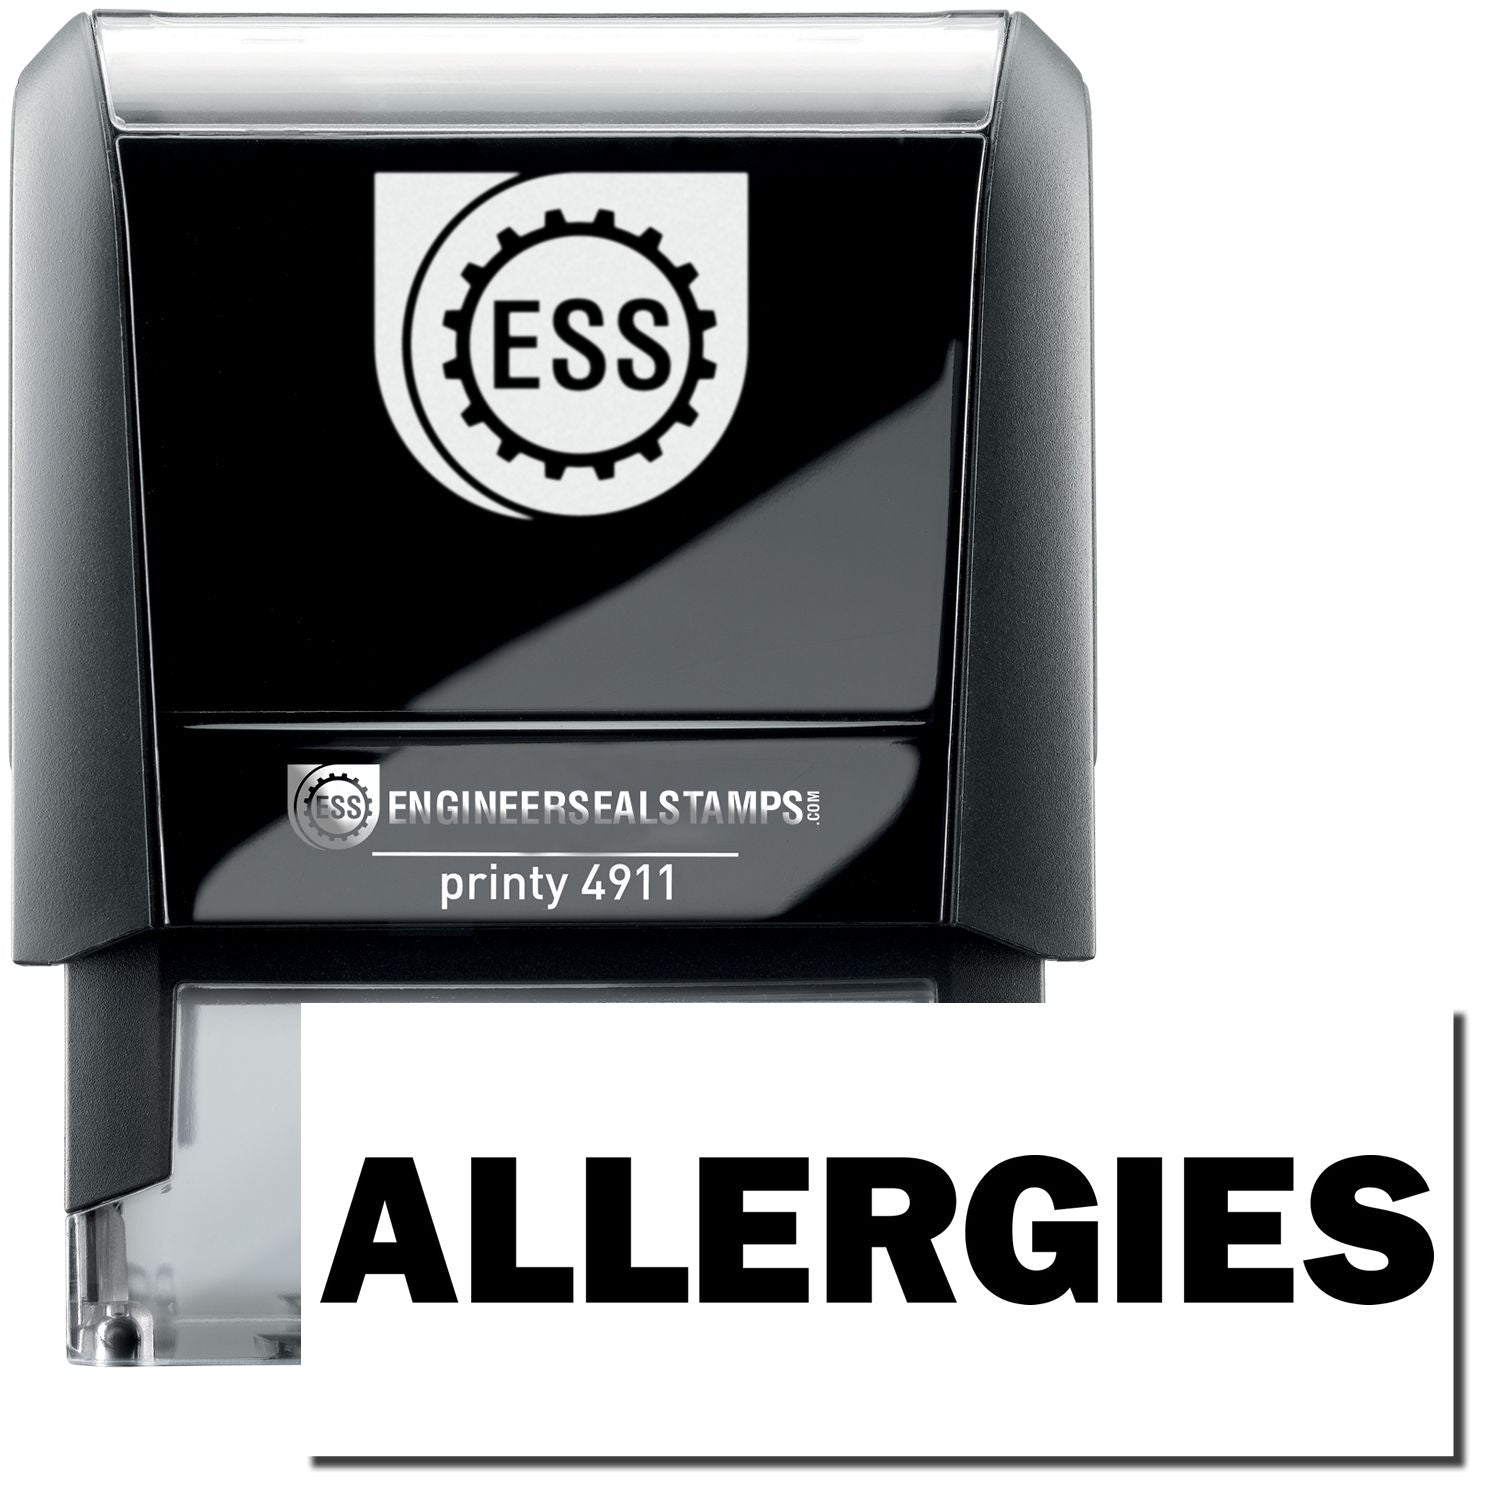 A self-inking stamp with a stamped image showing how the text "ALLERGIES" is displayed after stamping.